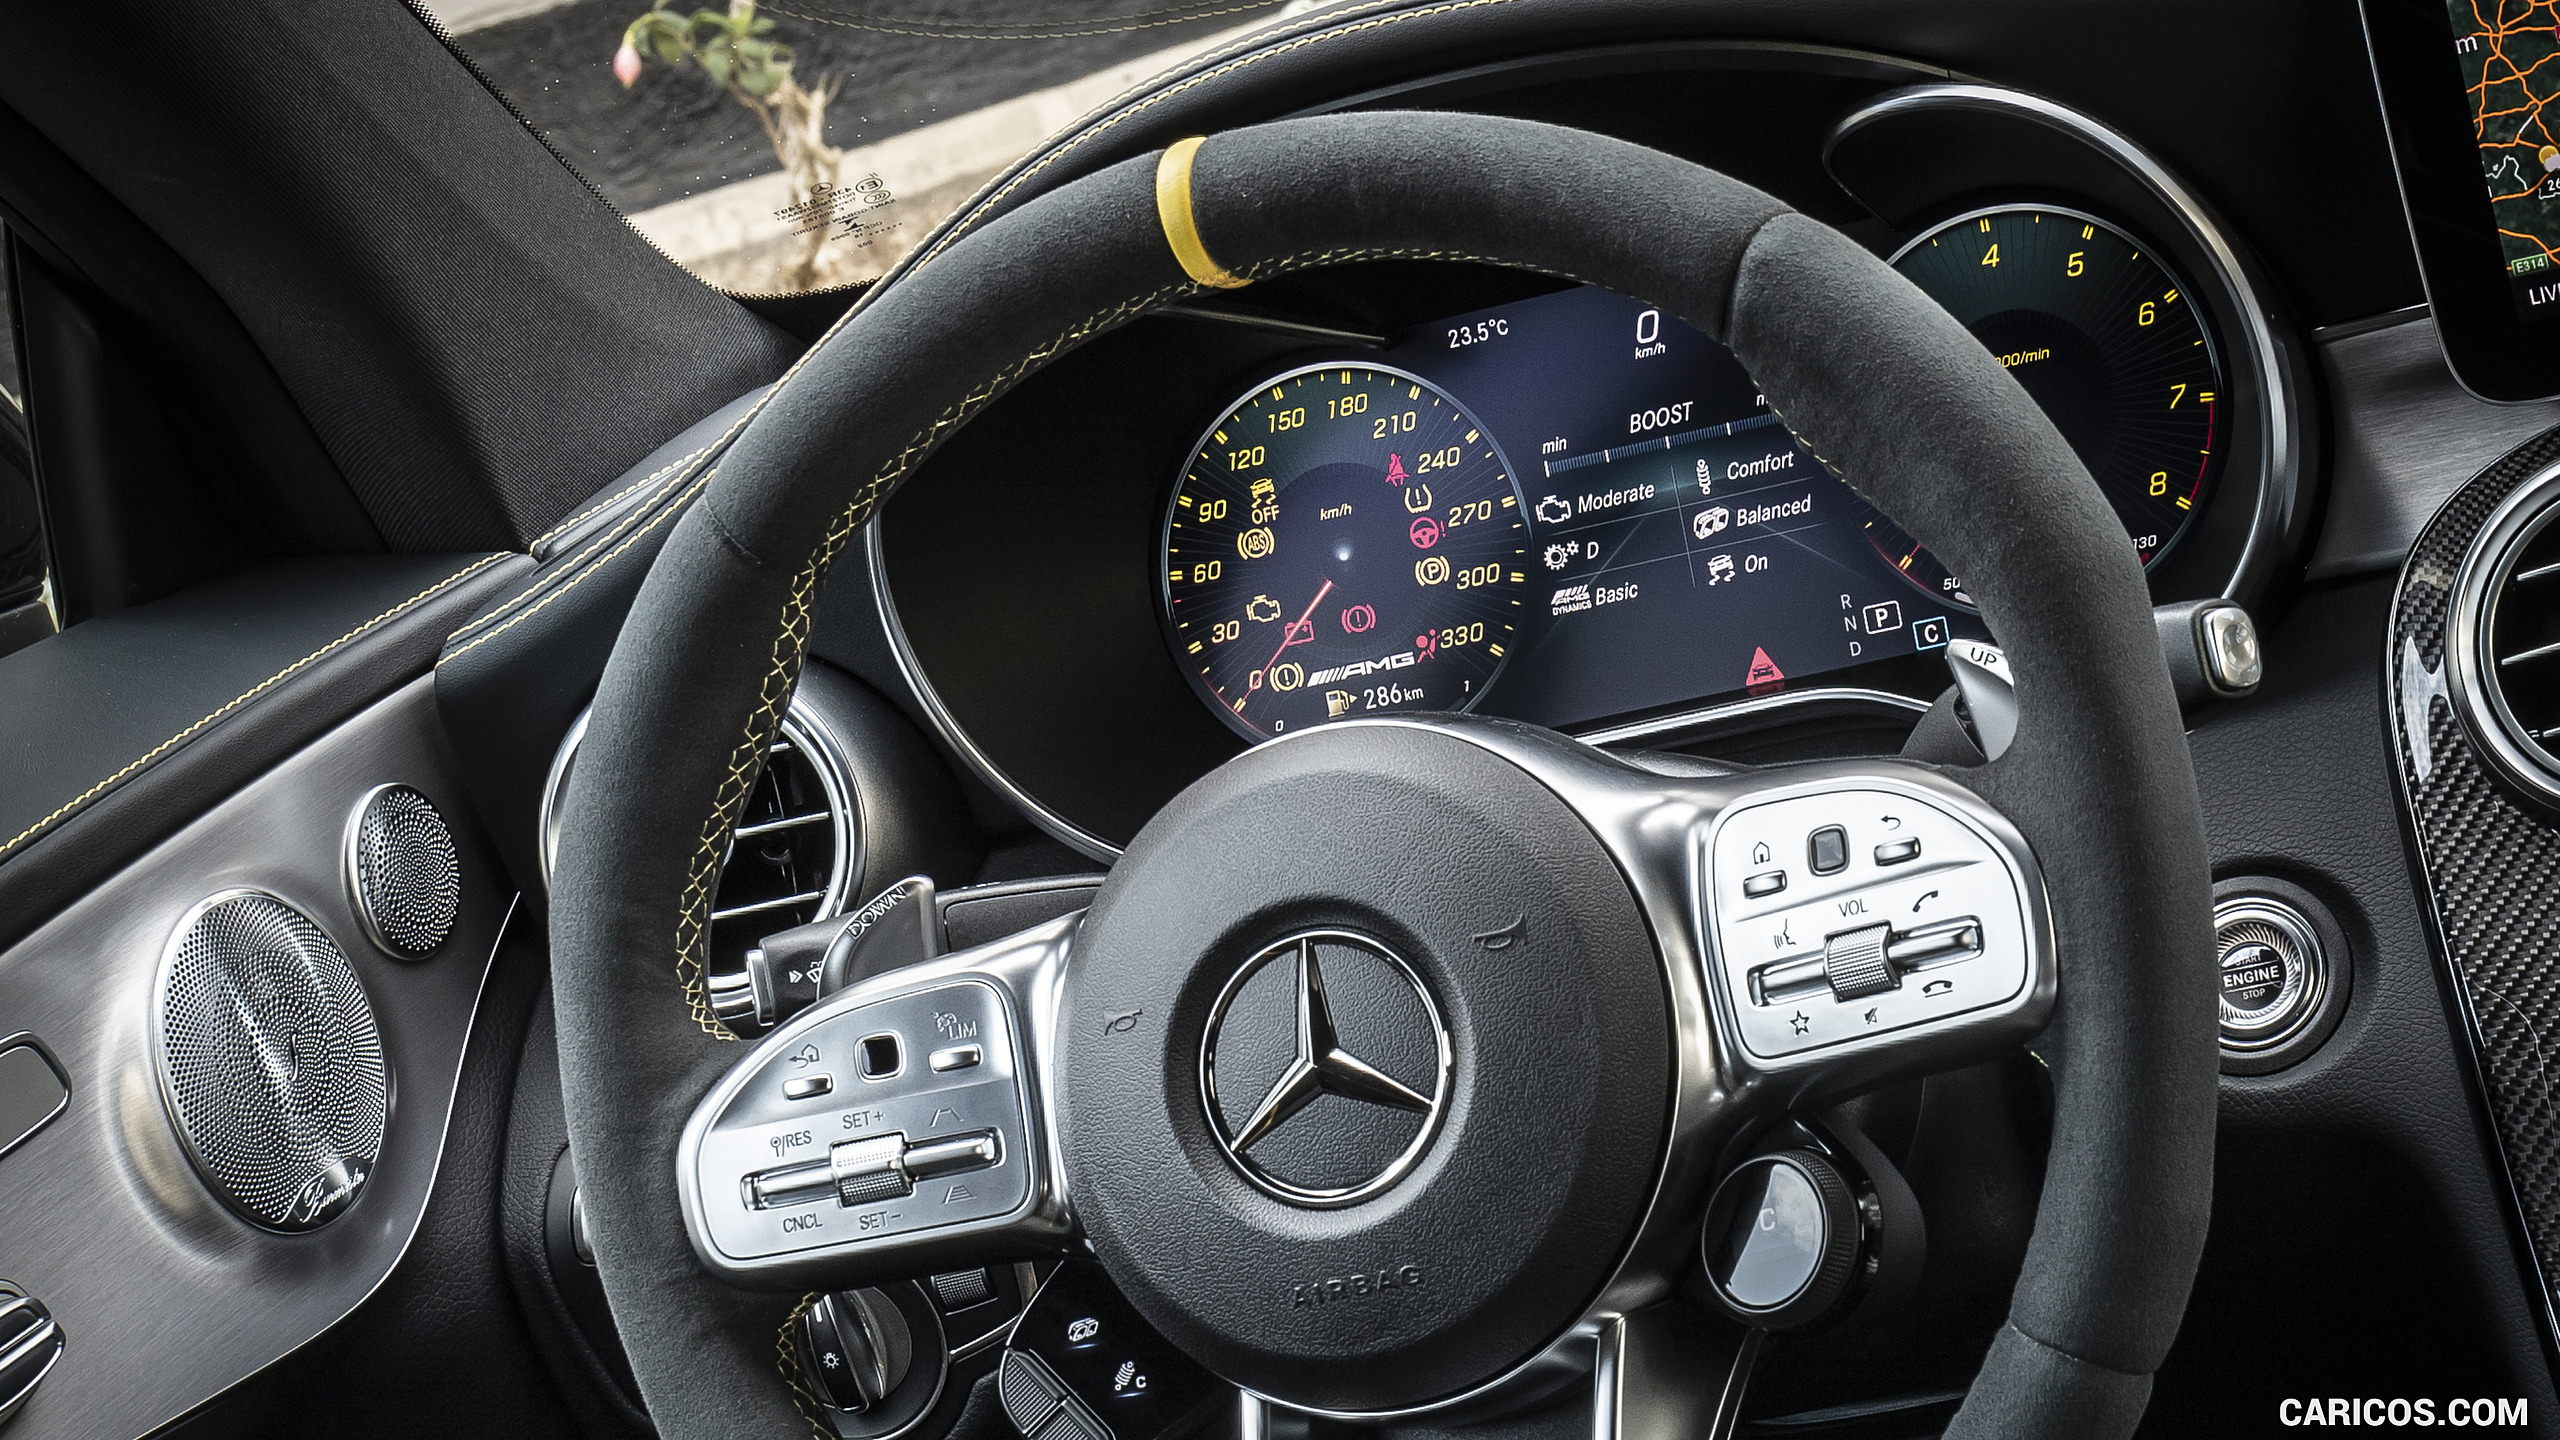 2019 Mercedes-AMG C 63 S Coupe - Interior, #92 of 106